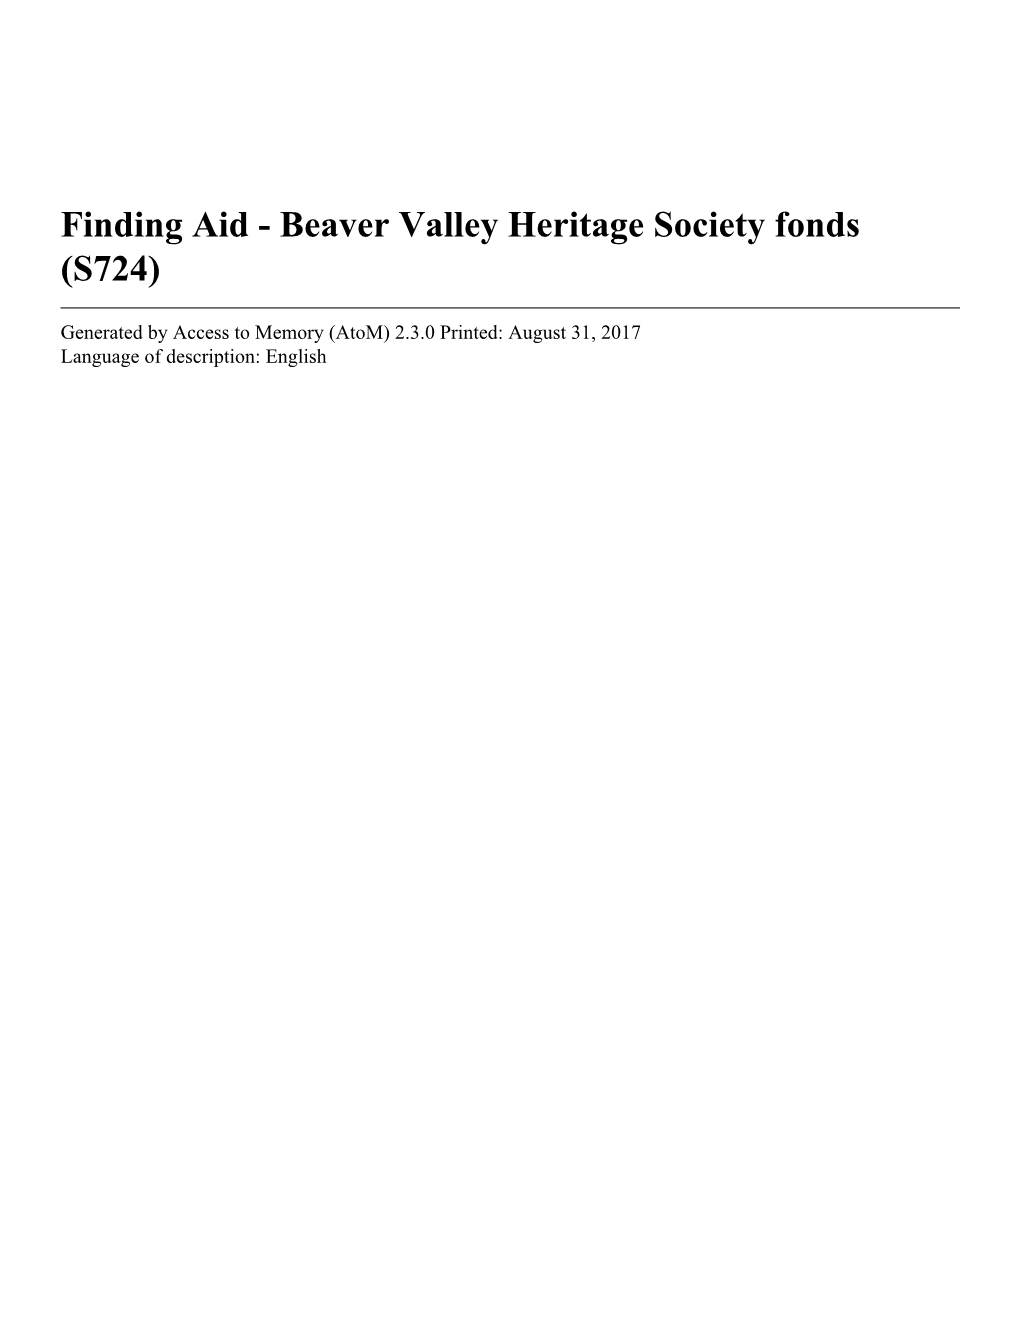 Finding Aid - Beaver Valley Heritage Society Fonds (S724)